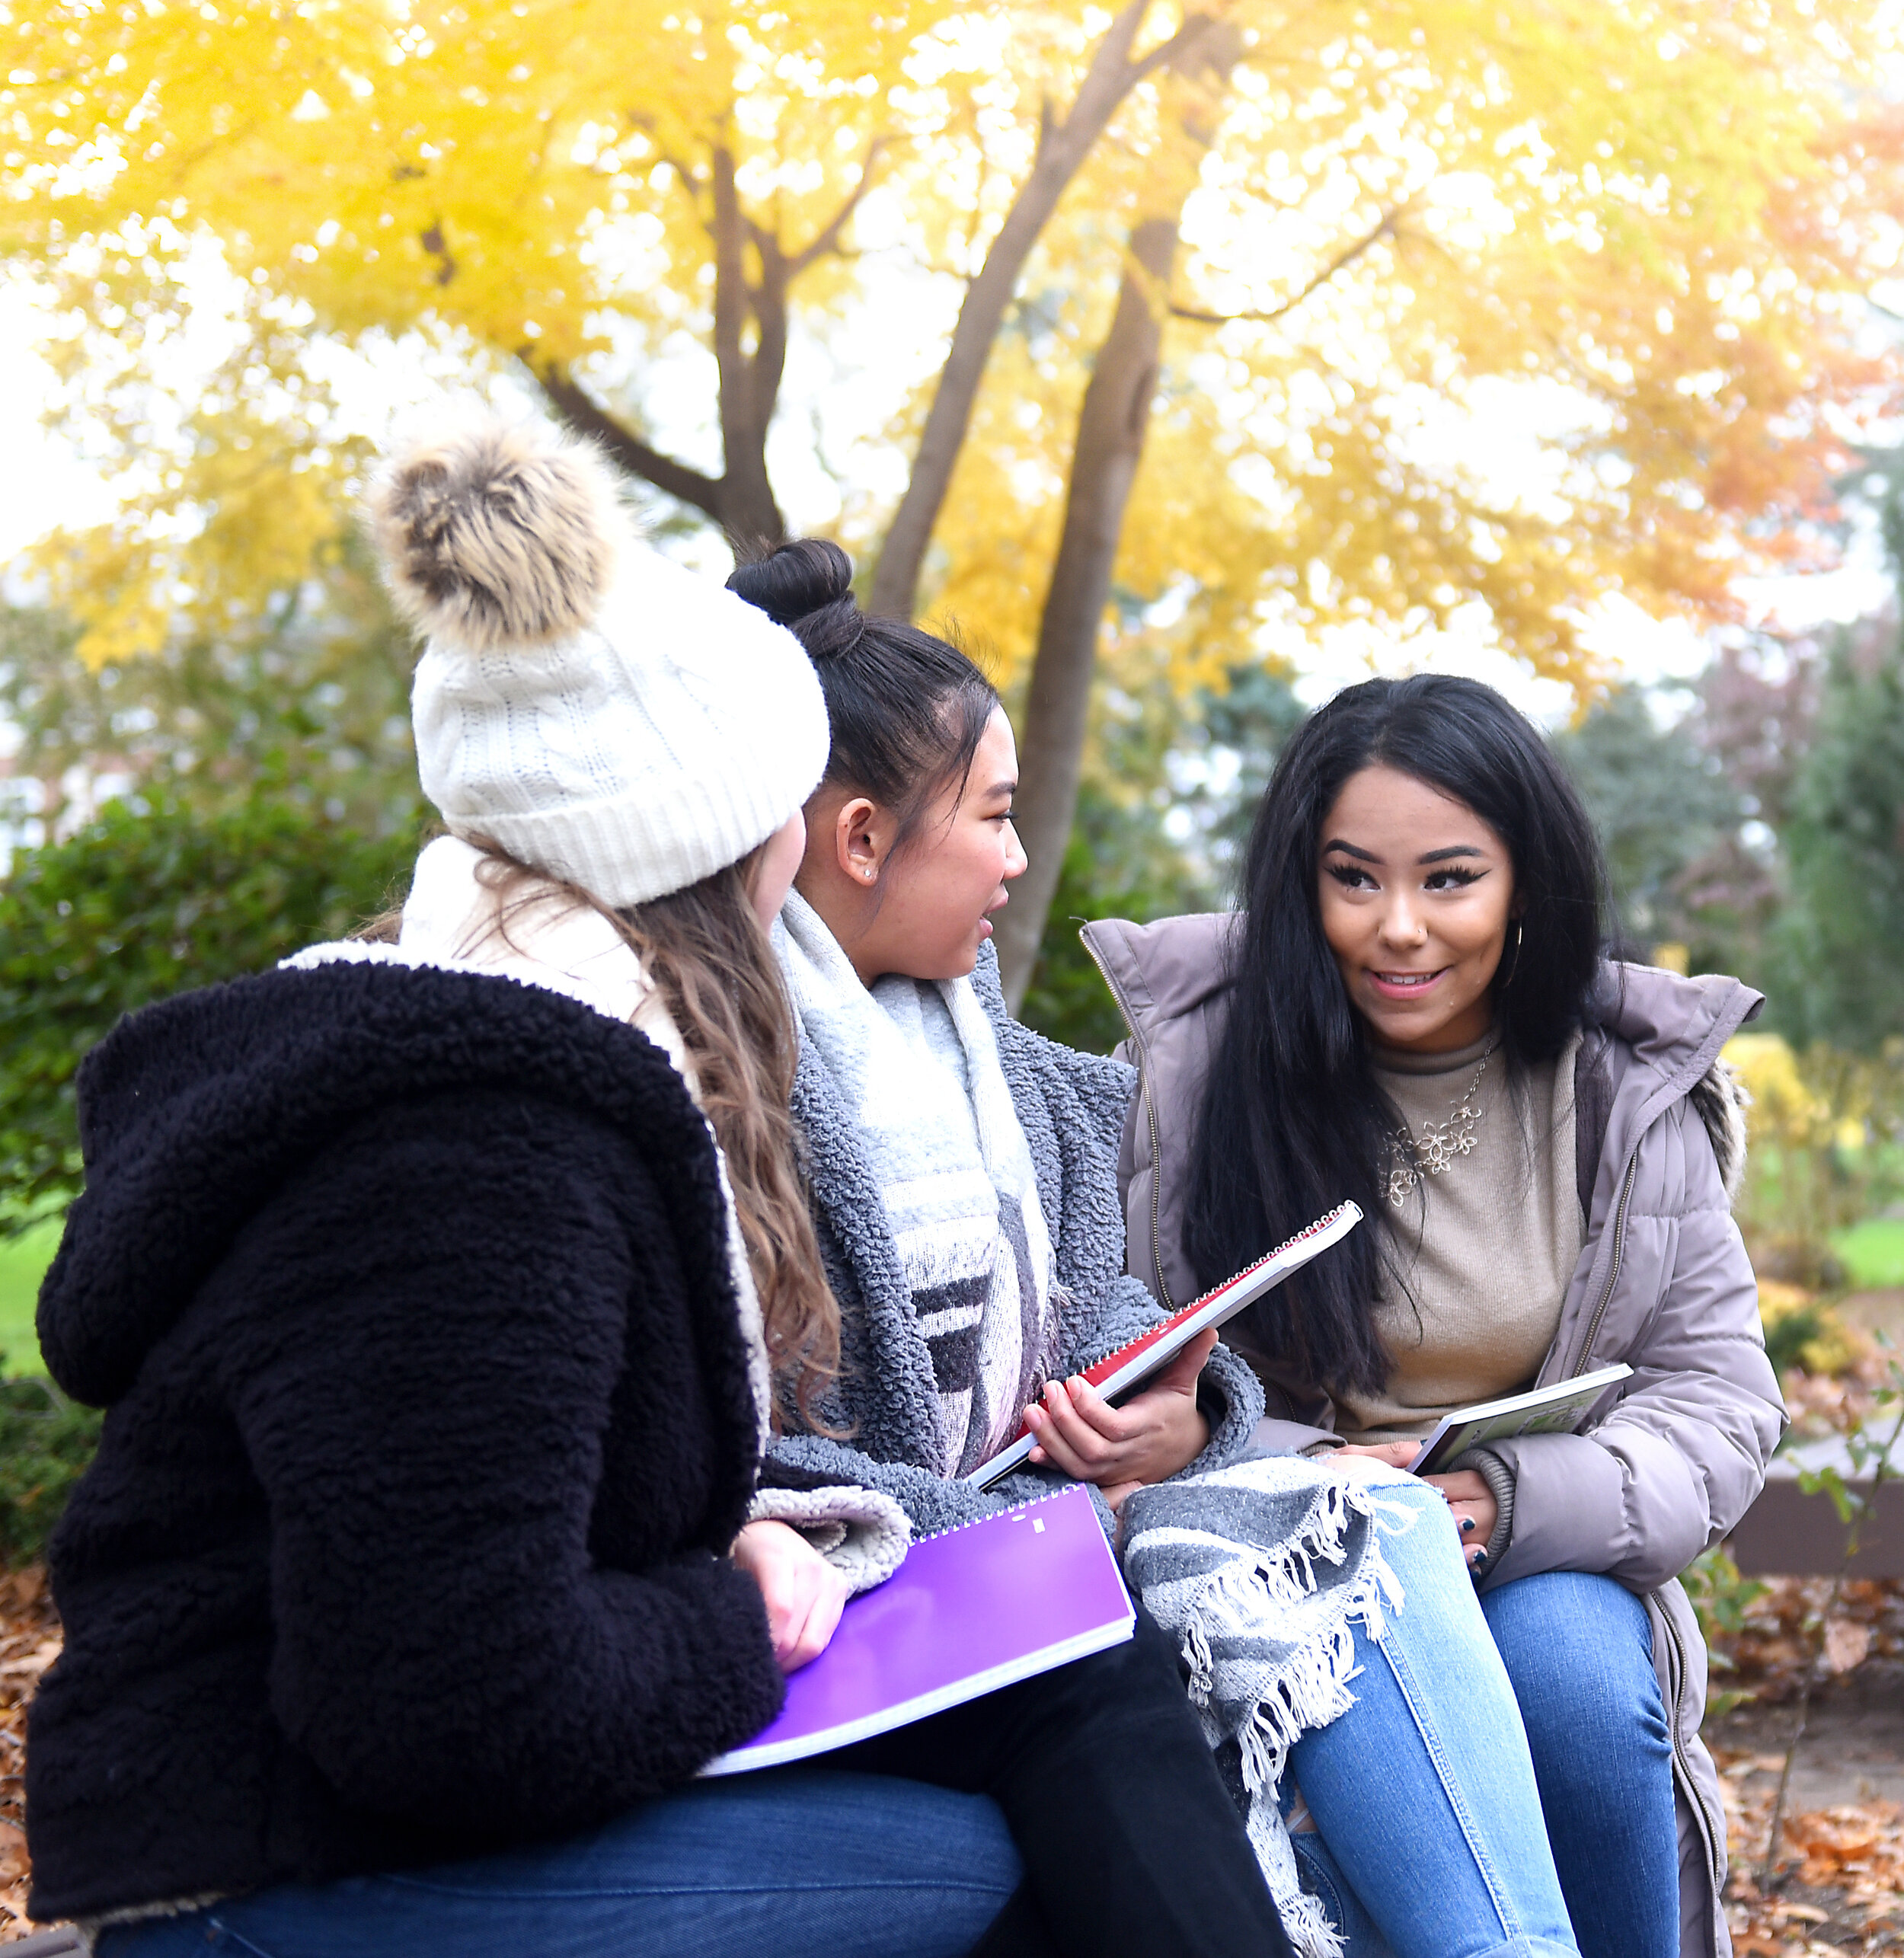 Students Study outside on Adelphi's campus in the fall.